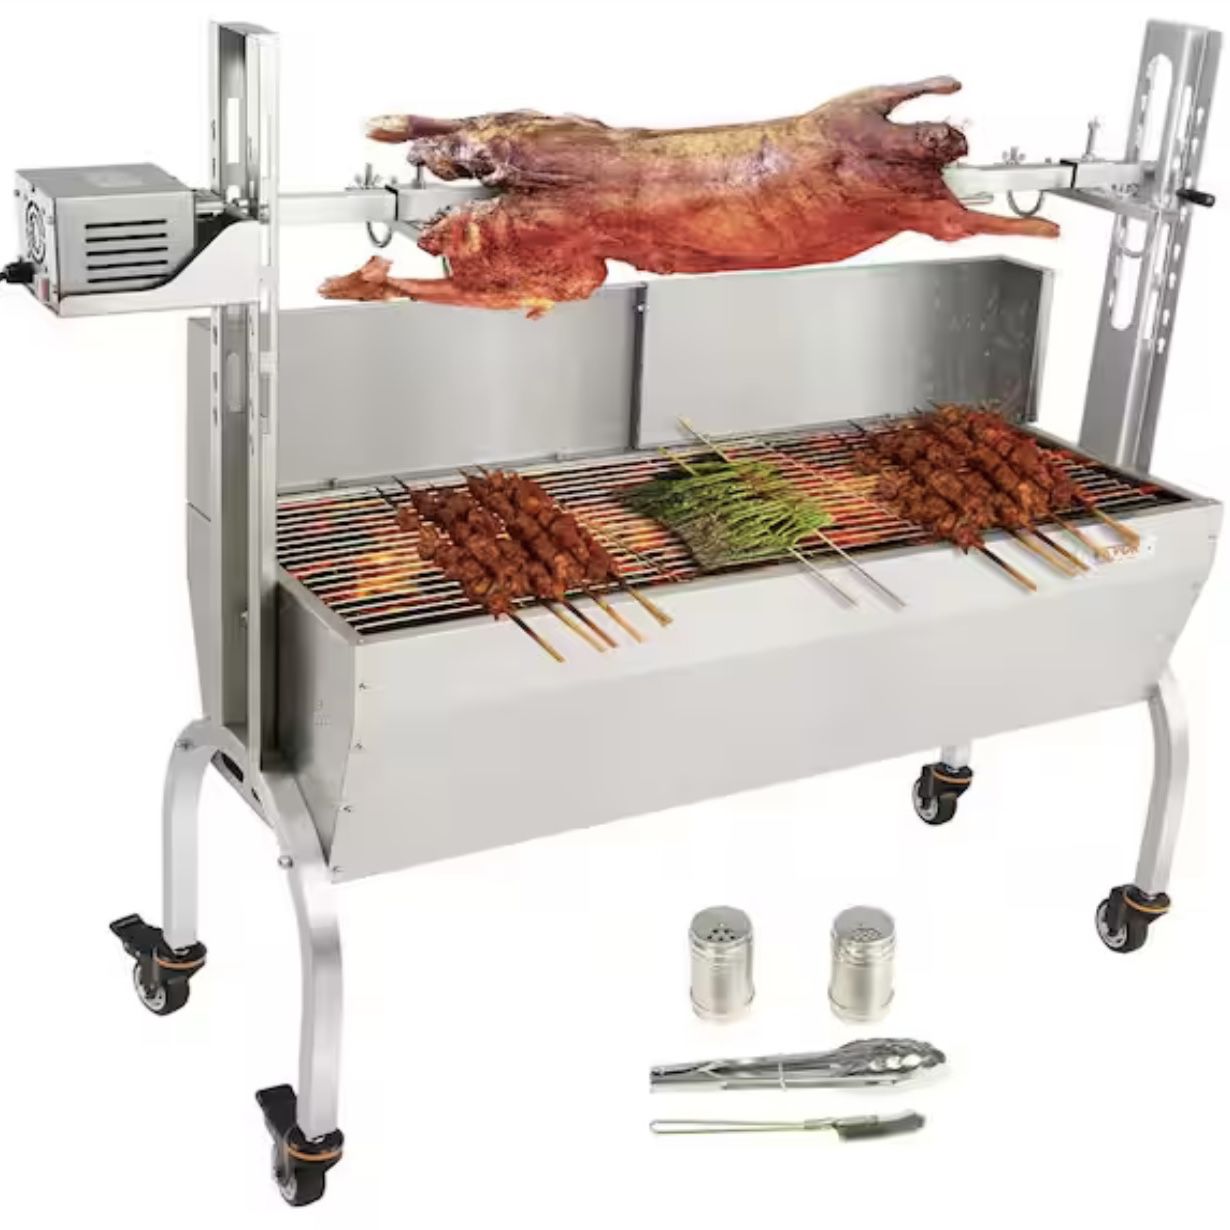 Stainless Steel Rotisserie Grill 46 in. BBQ Hog Rotisserie Roaster with Windscreen Electric Lamb Rotisserie System